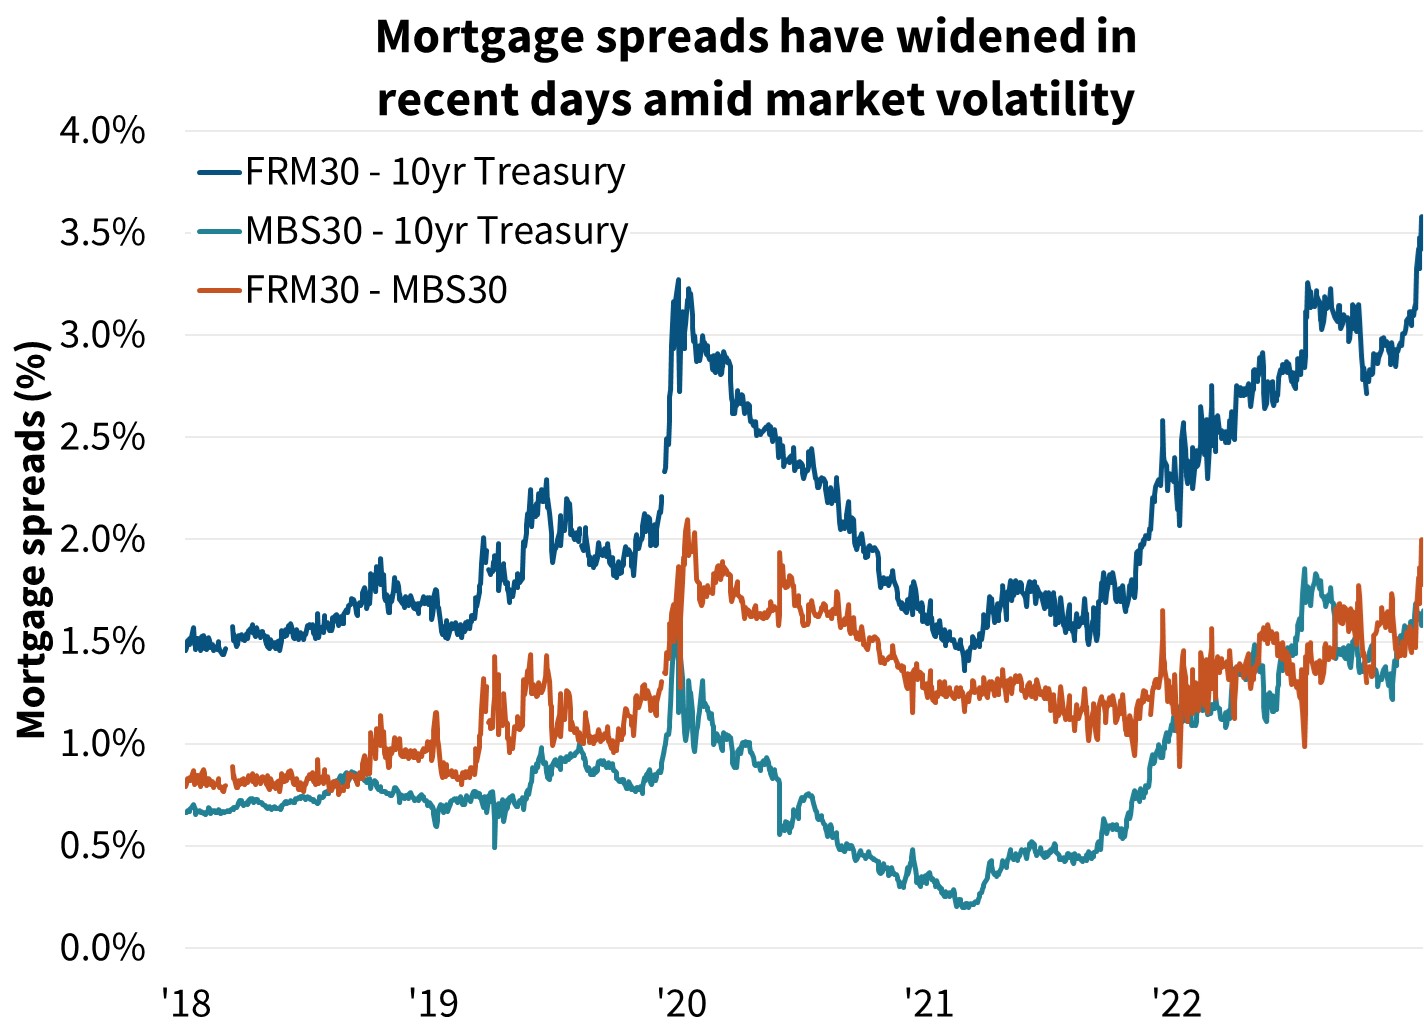  Mortgage spreads have widened in recent days amid market volatility
